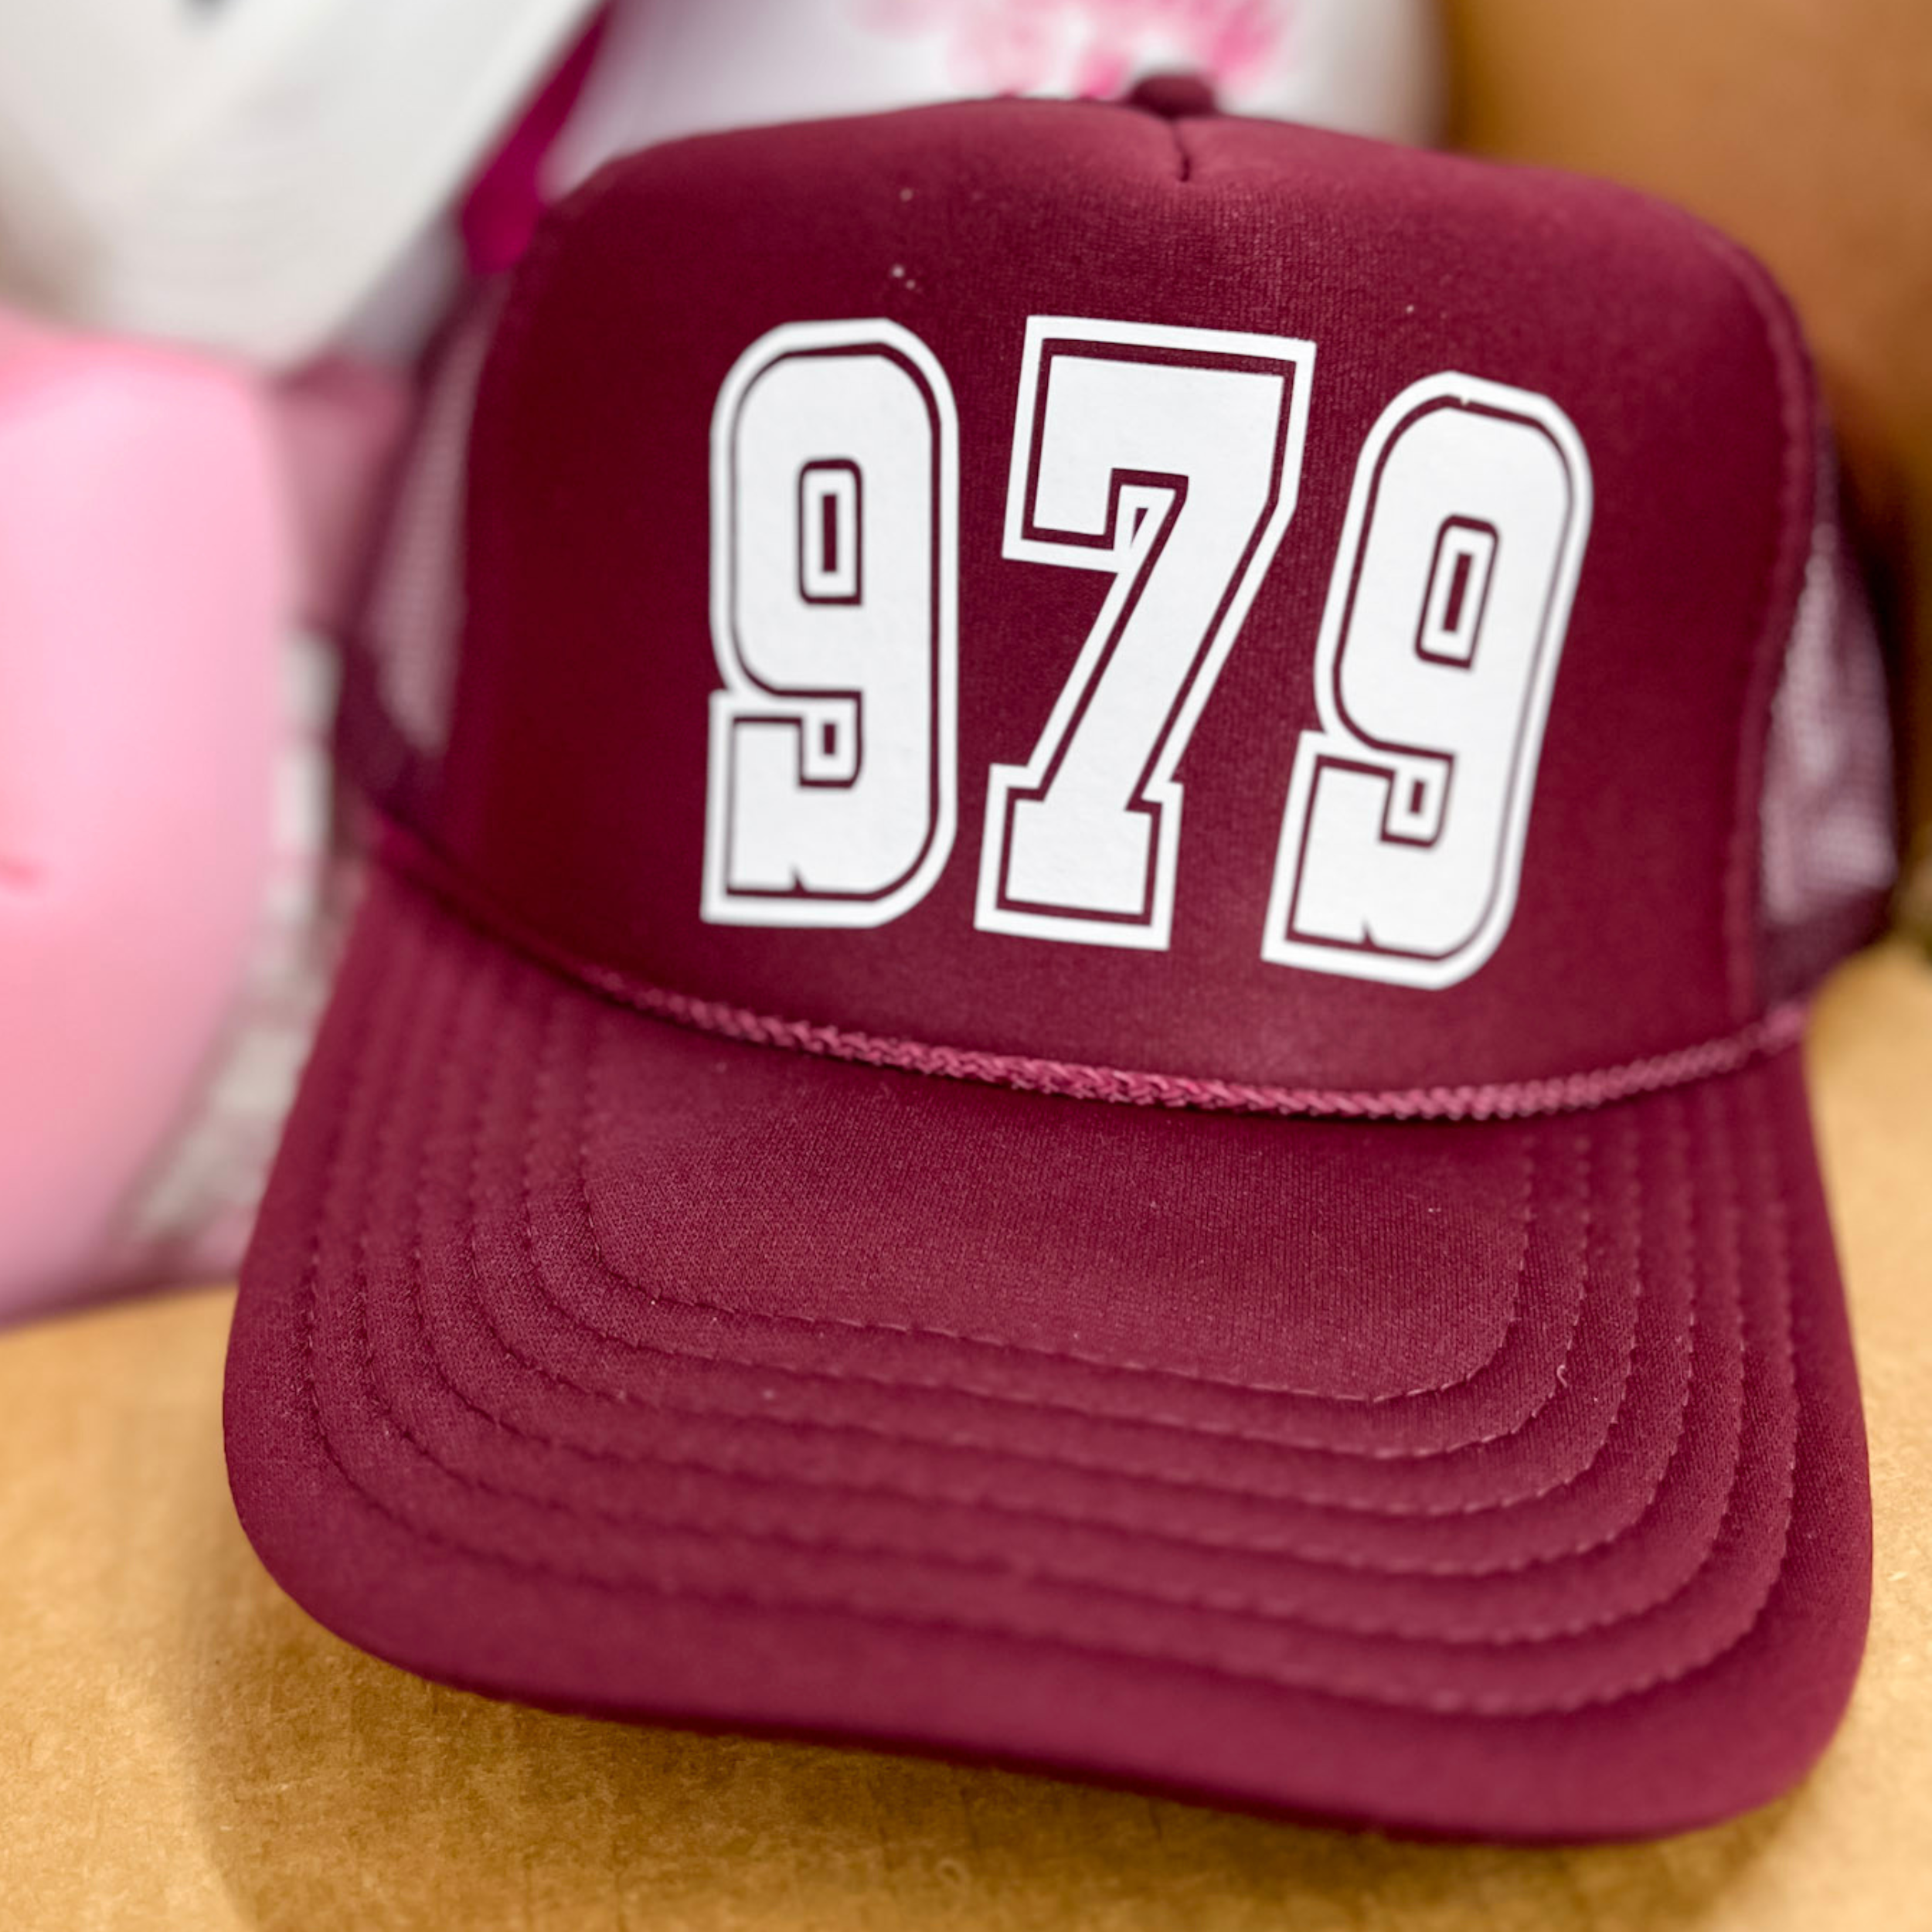 Photo features a maroon trucker hat with the numbers 979 in large white font on the front.